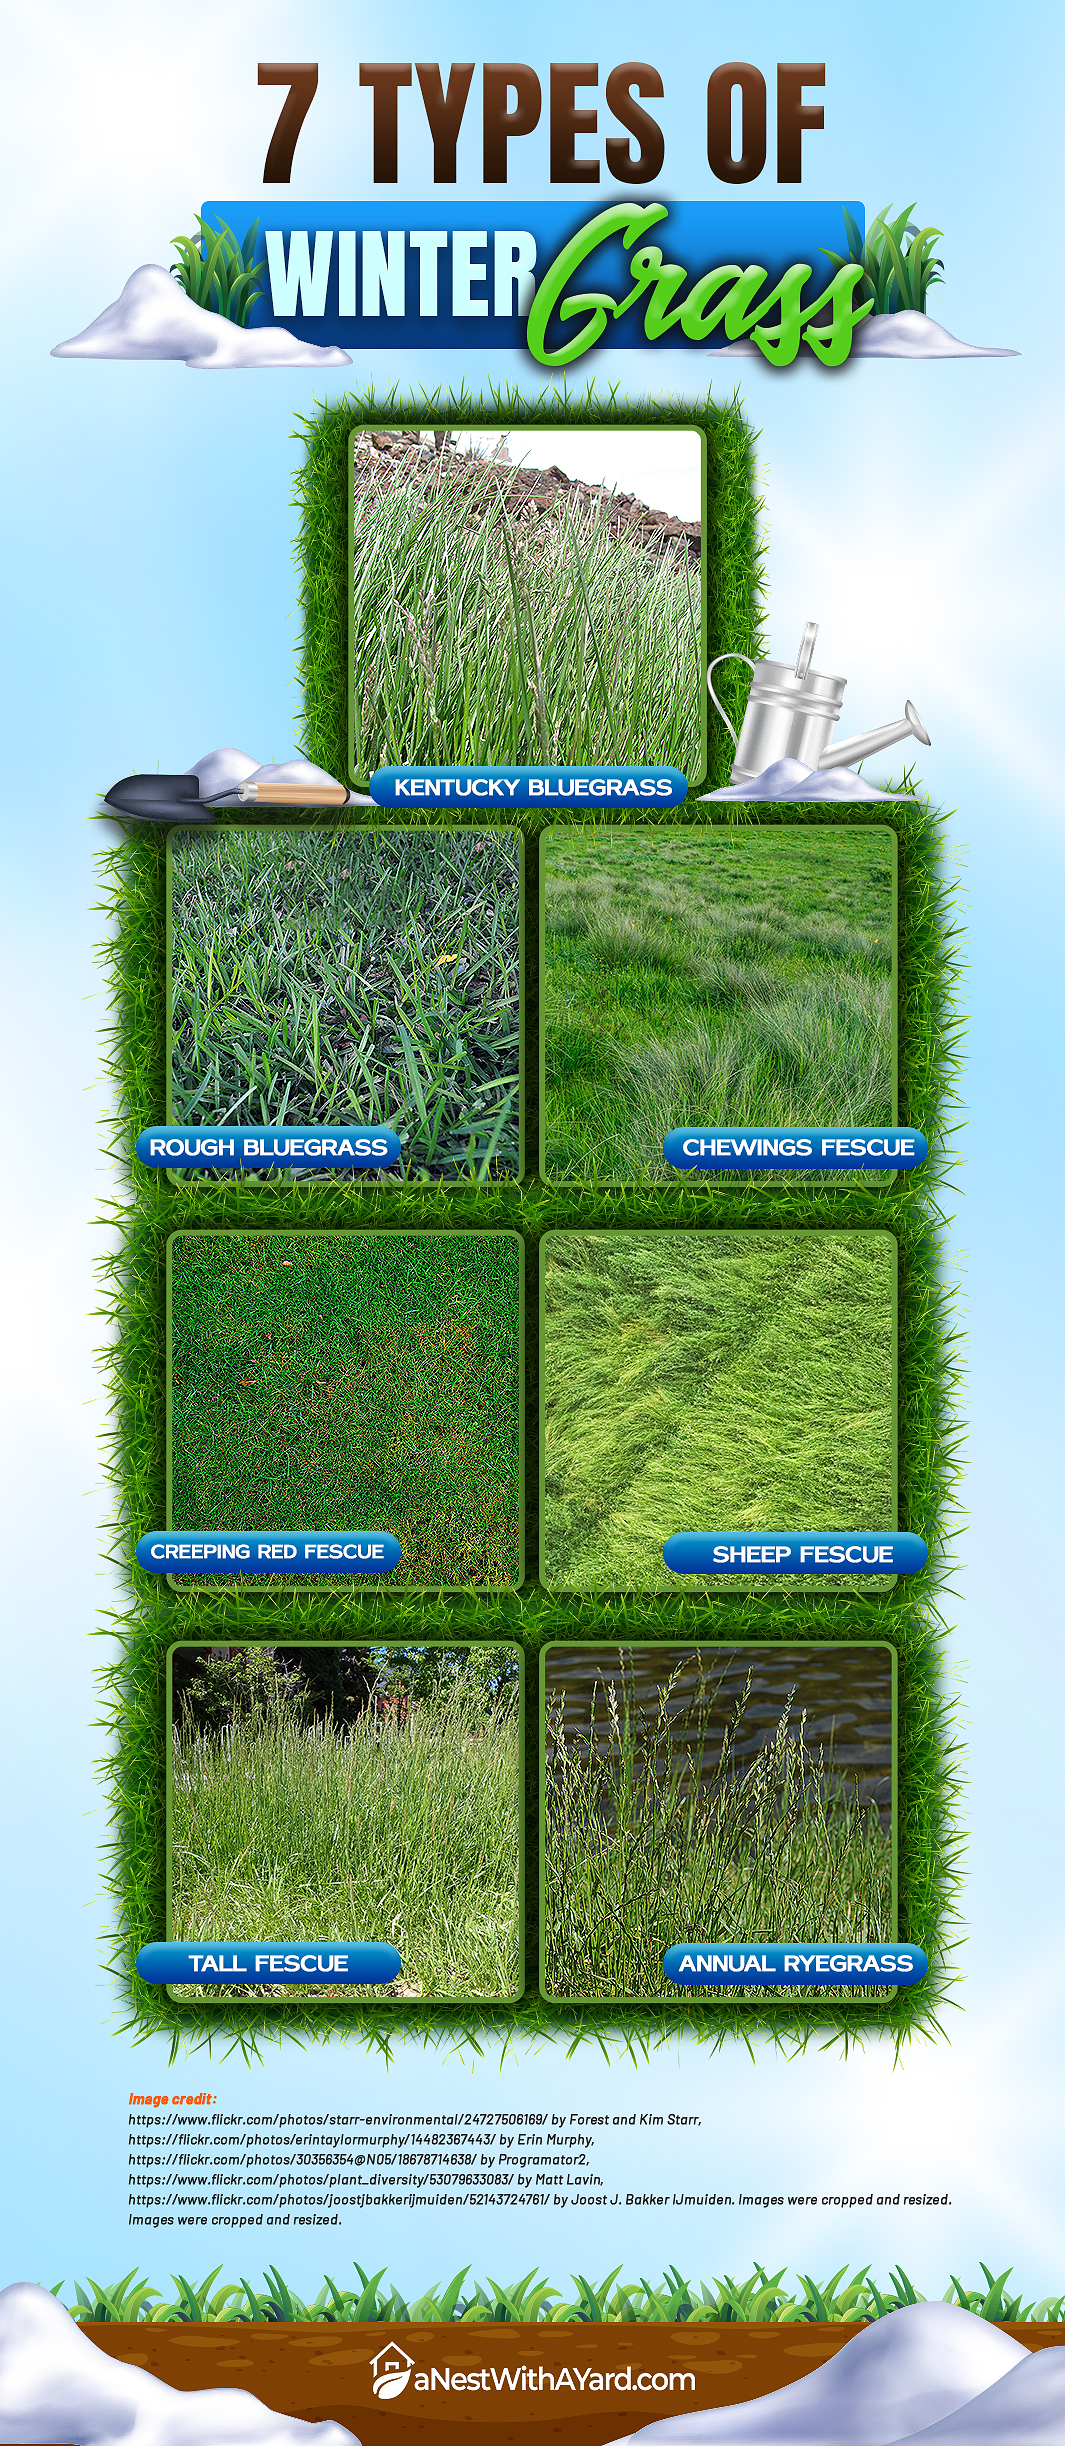 Infographic depicting 7 types of winter grass